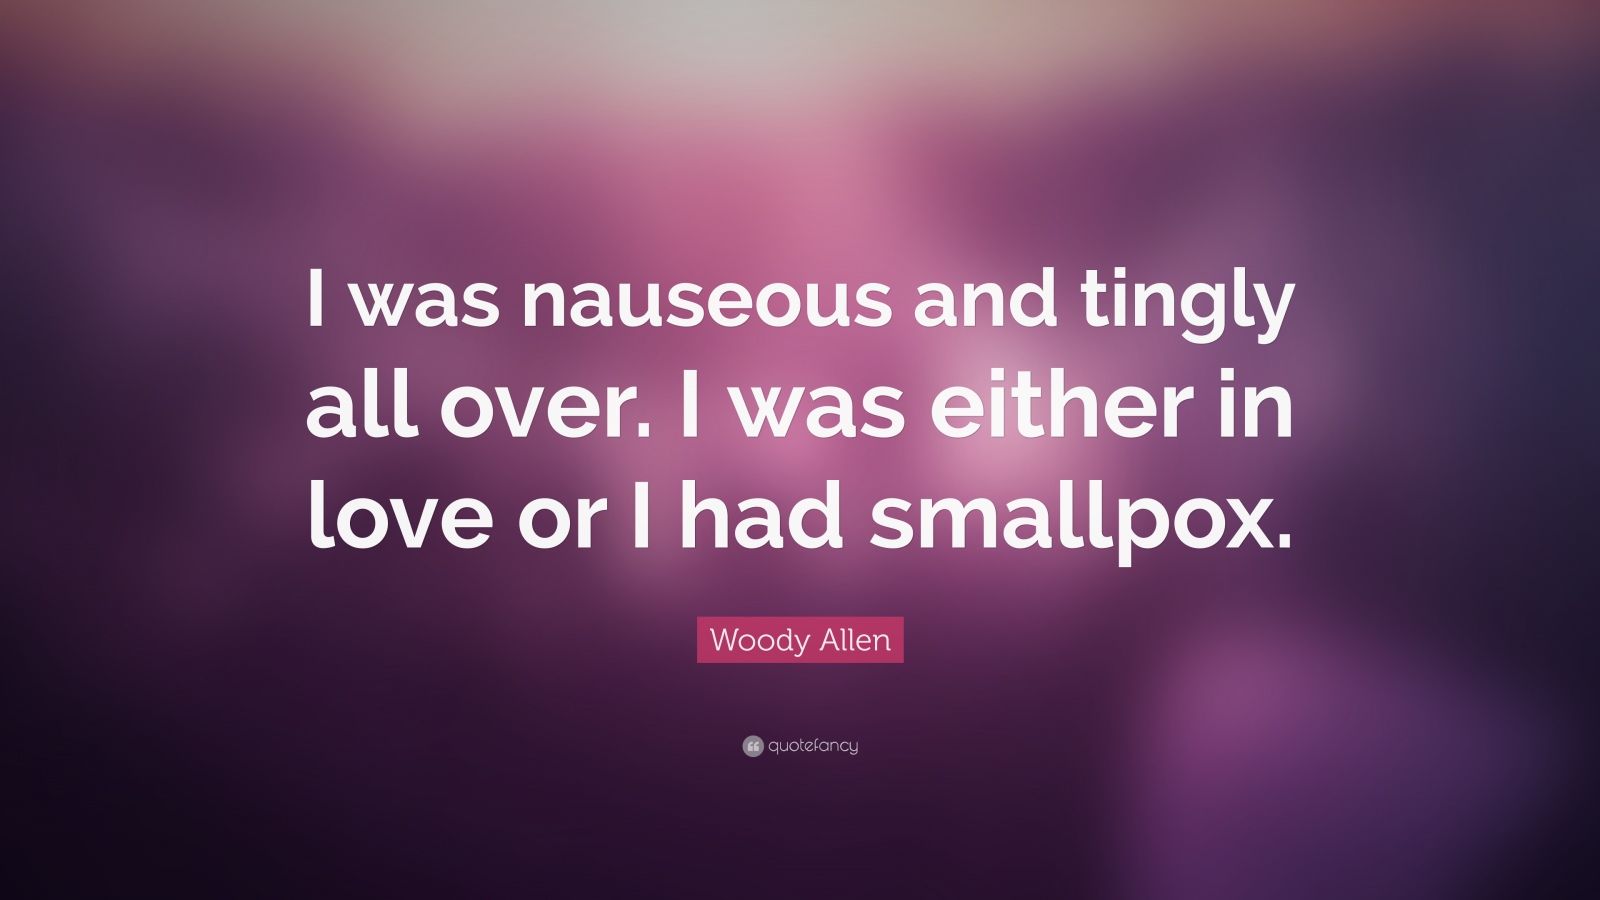 I was nauseous and tingly all over. I was either in love or I had smallpox